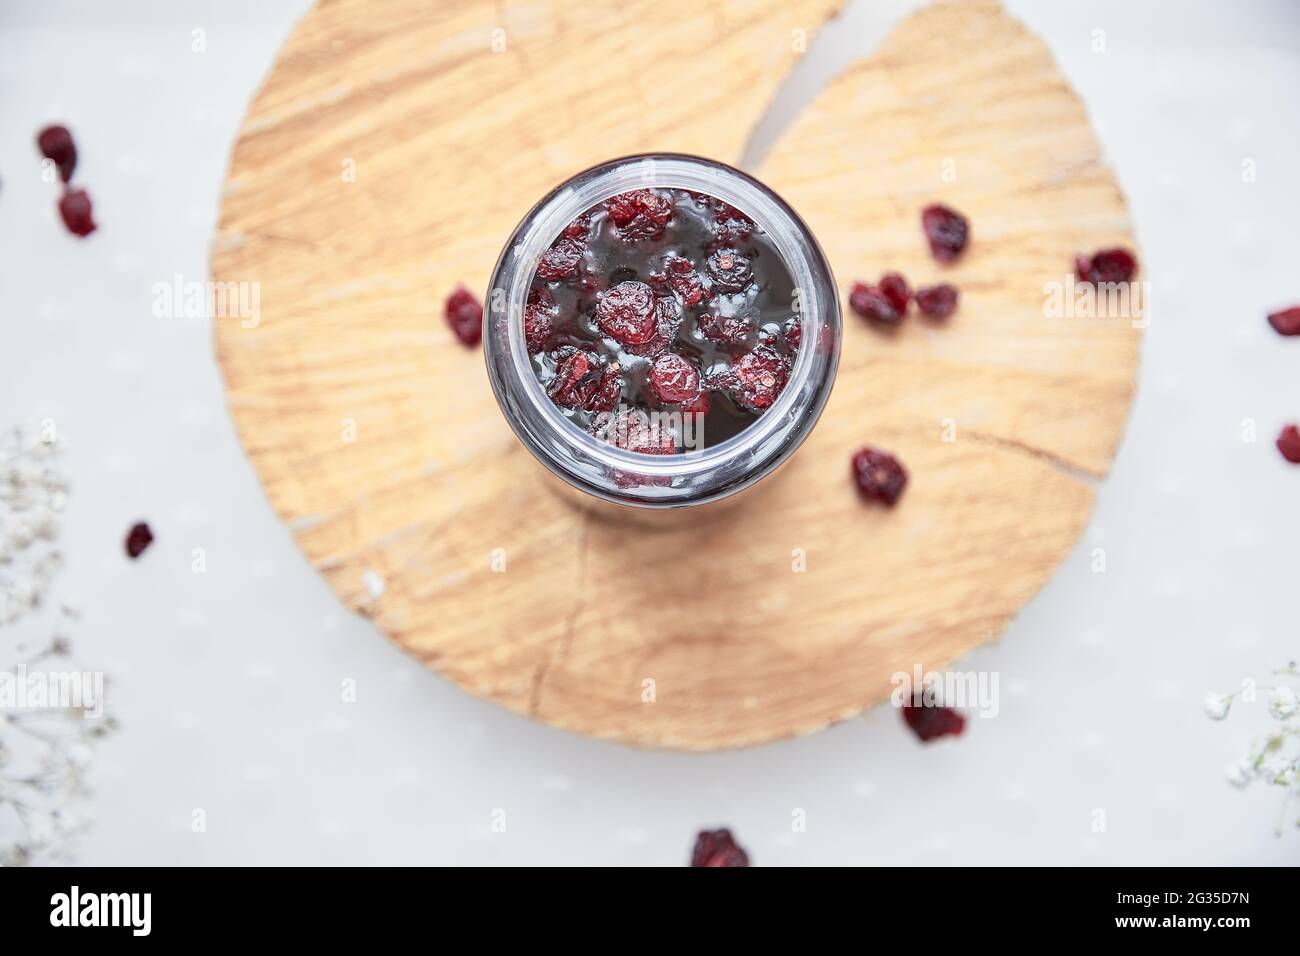 Healthy fermented honey product with cranberry. Food preservative at home, cozy, rustic flat lay. Fermentation process. Delicious recipe concept. Anti-viral food. Stock Photo